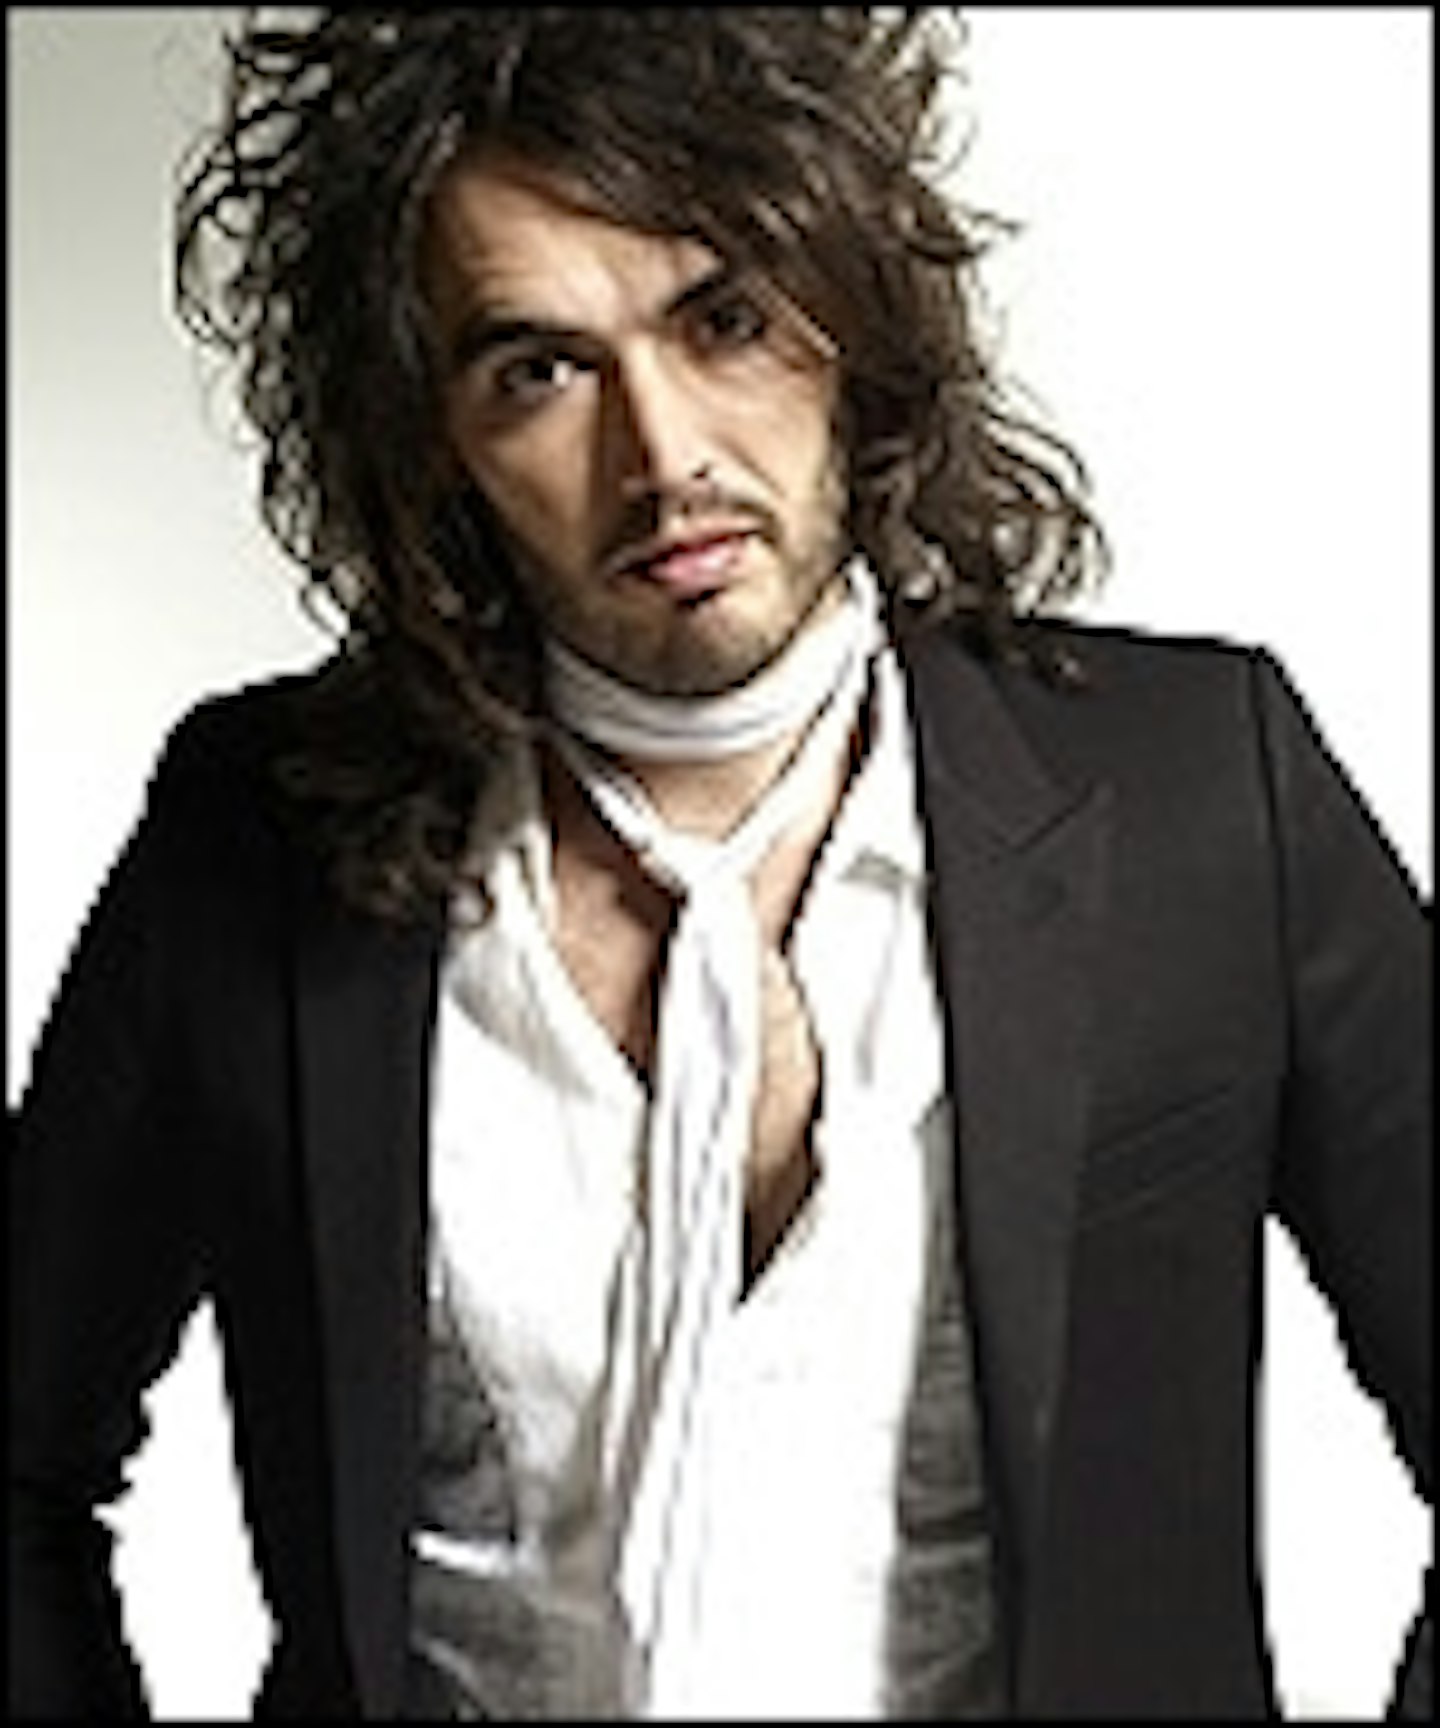 Russell Brand Producing New Comedy